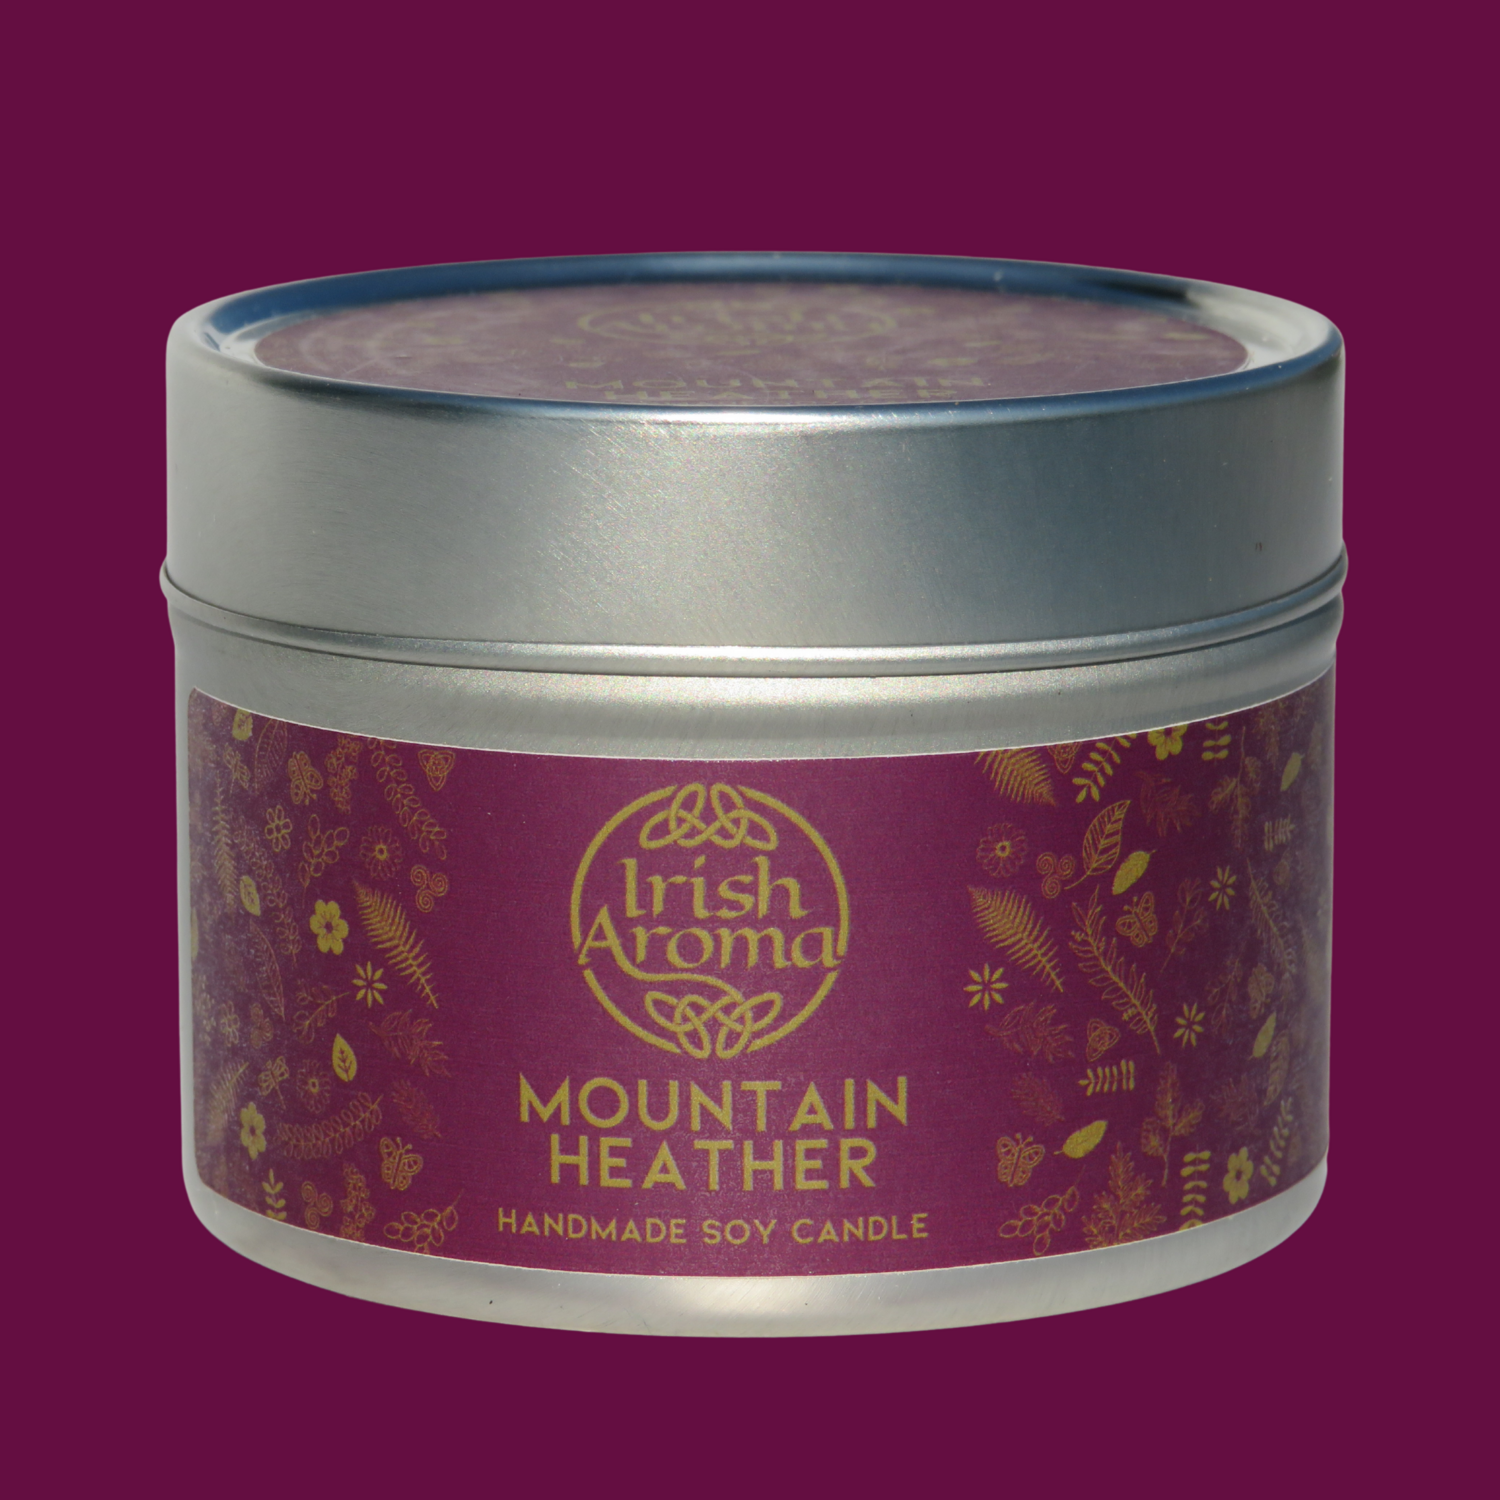 Mountain Heather - Handmade Soy Candle